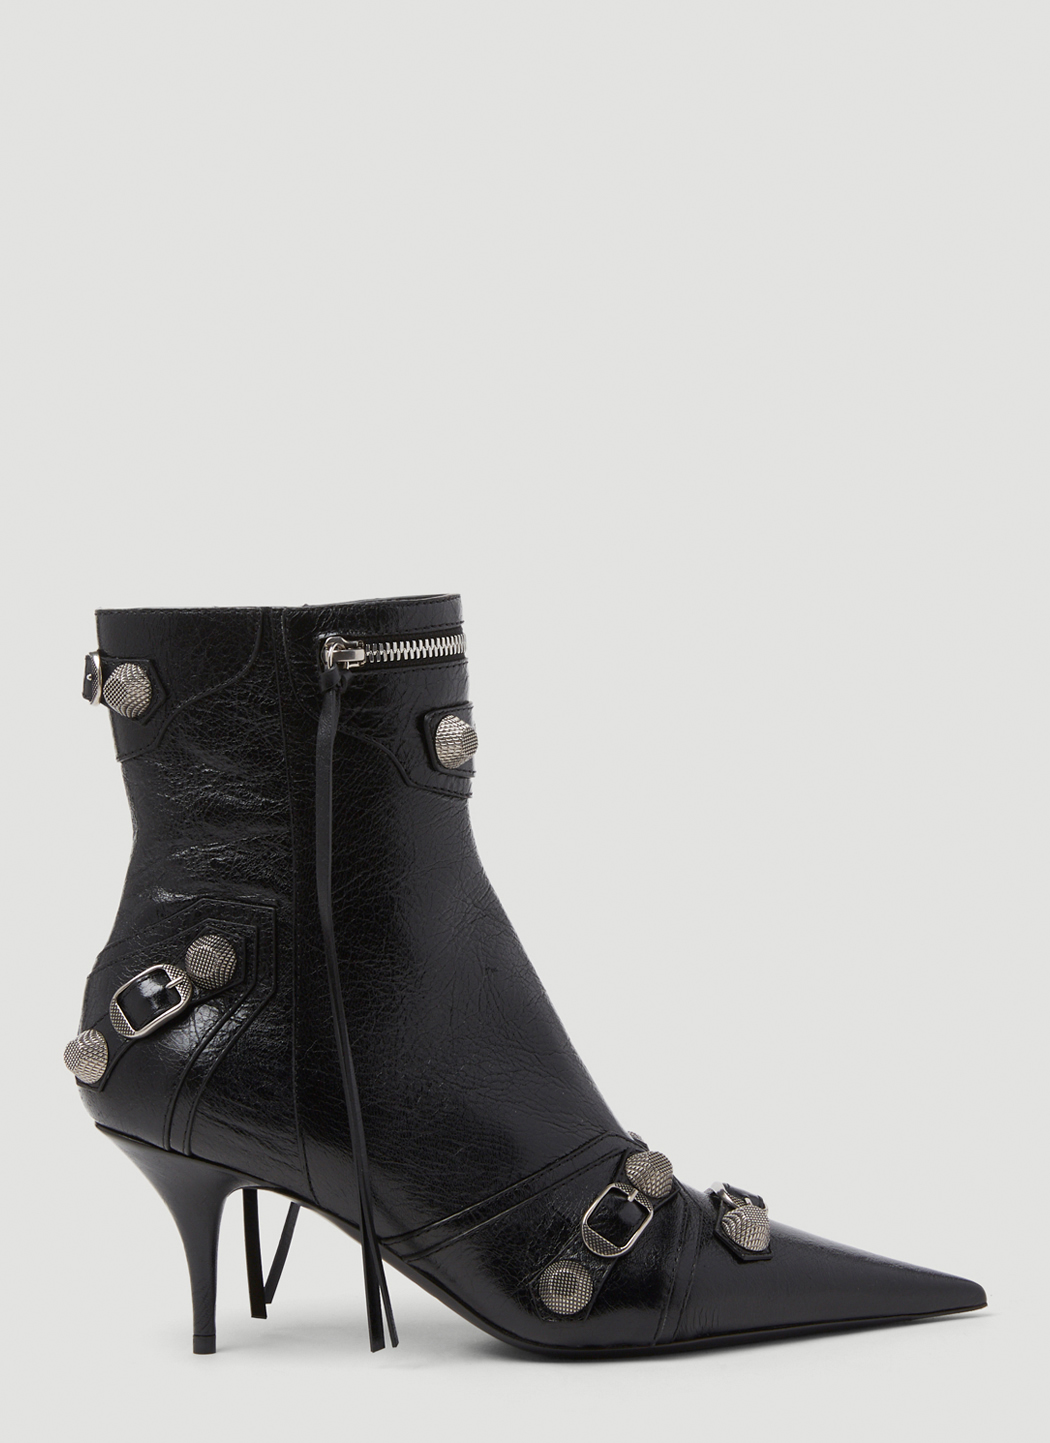 M70 Heeled Boots in Black | LN-CC®